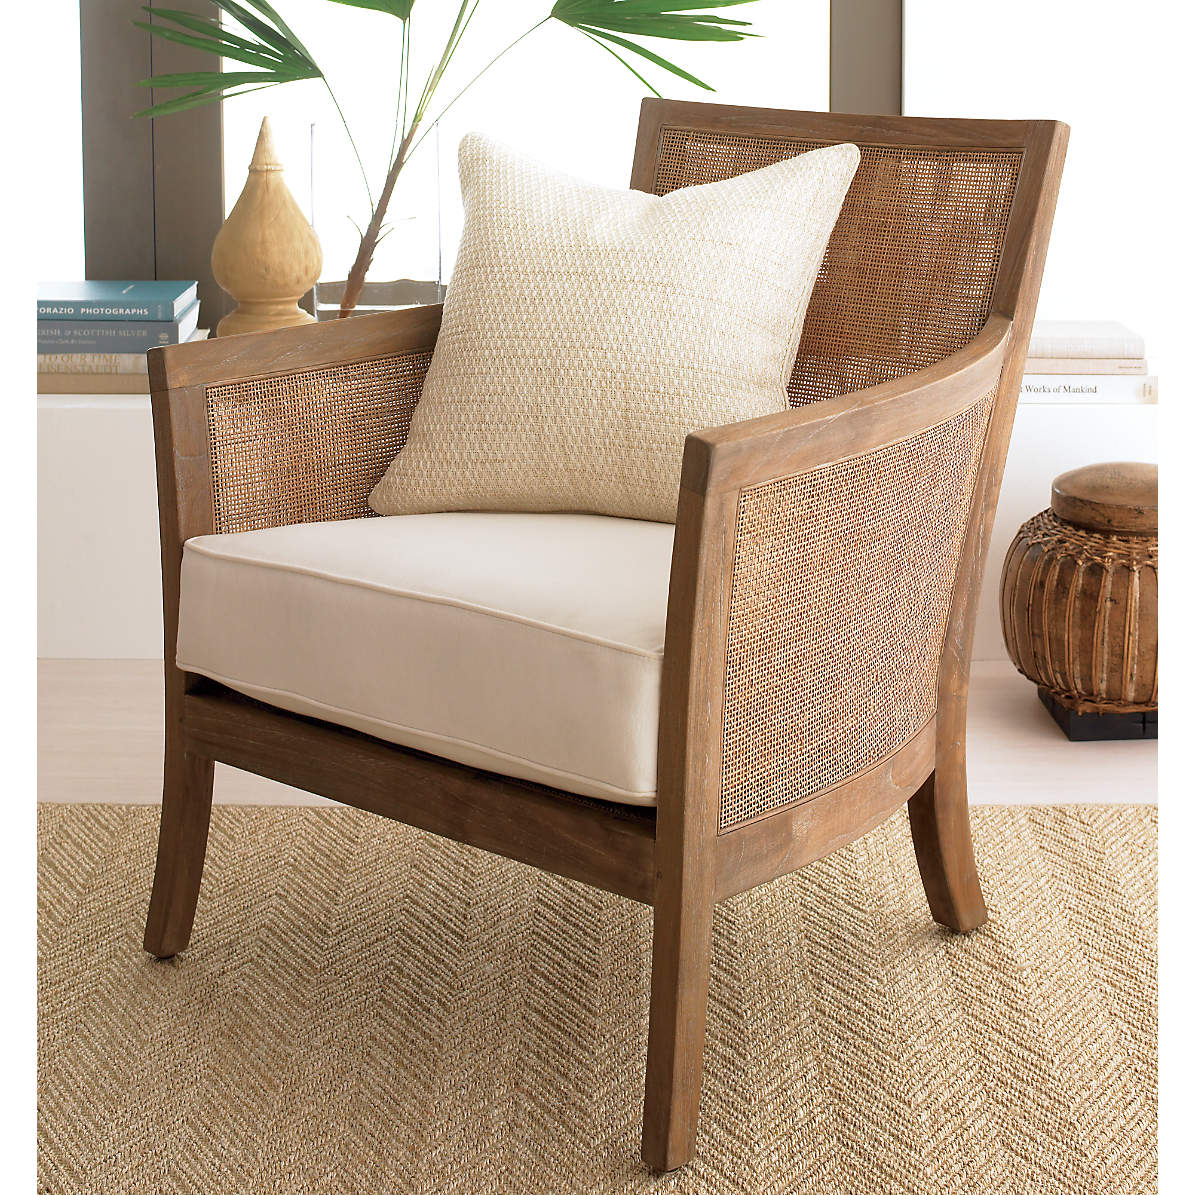 Crate And Barrel Wicker Chair : Shop for crate and barrel chairs at cb2